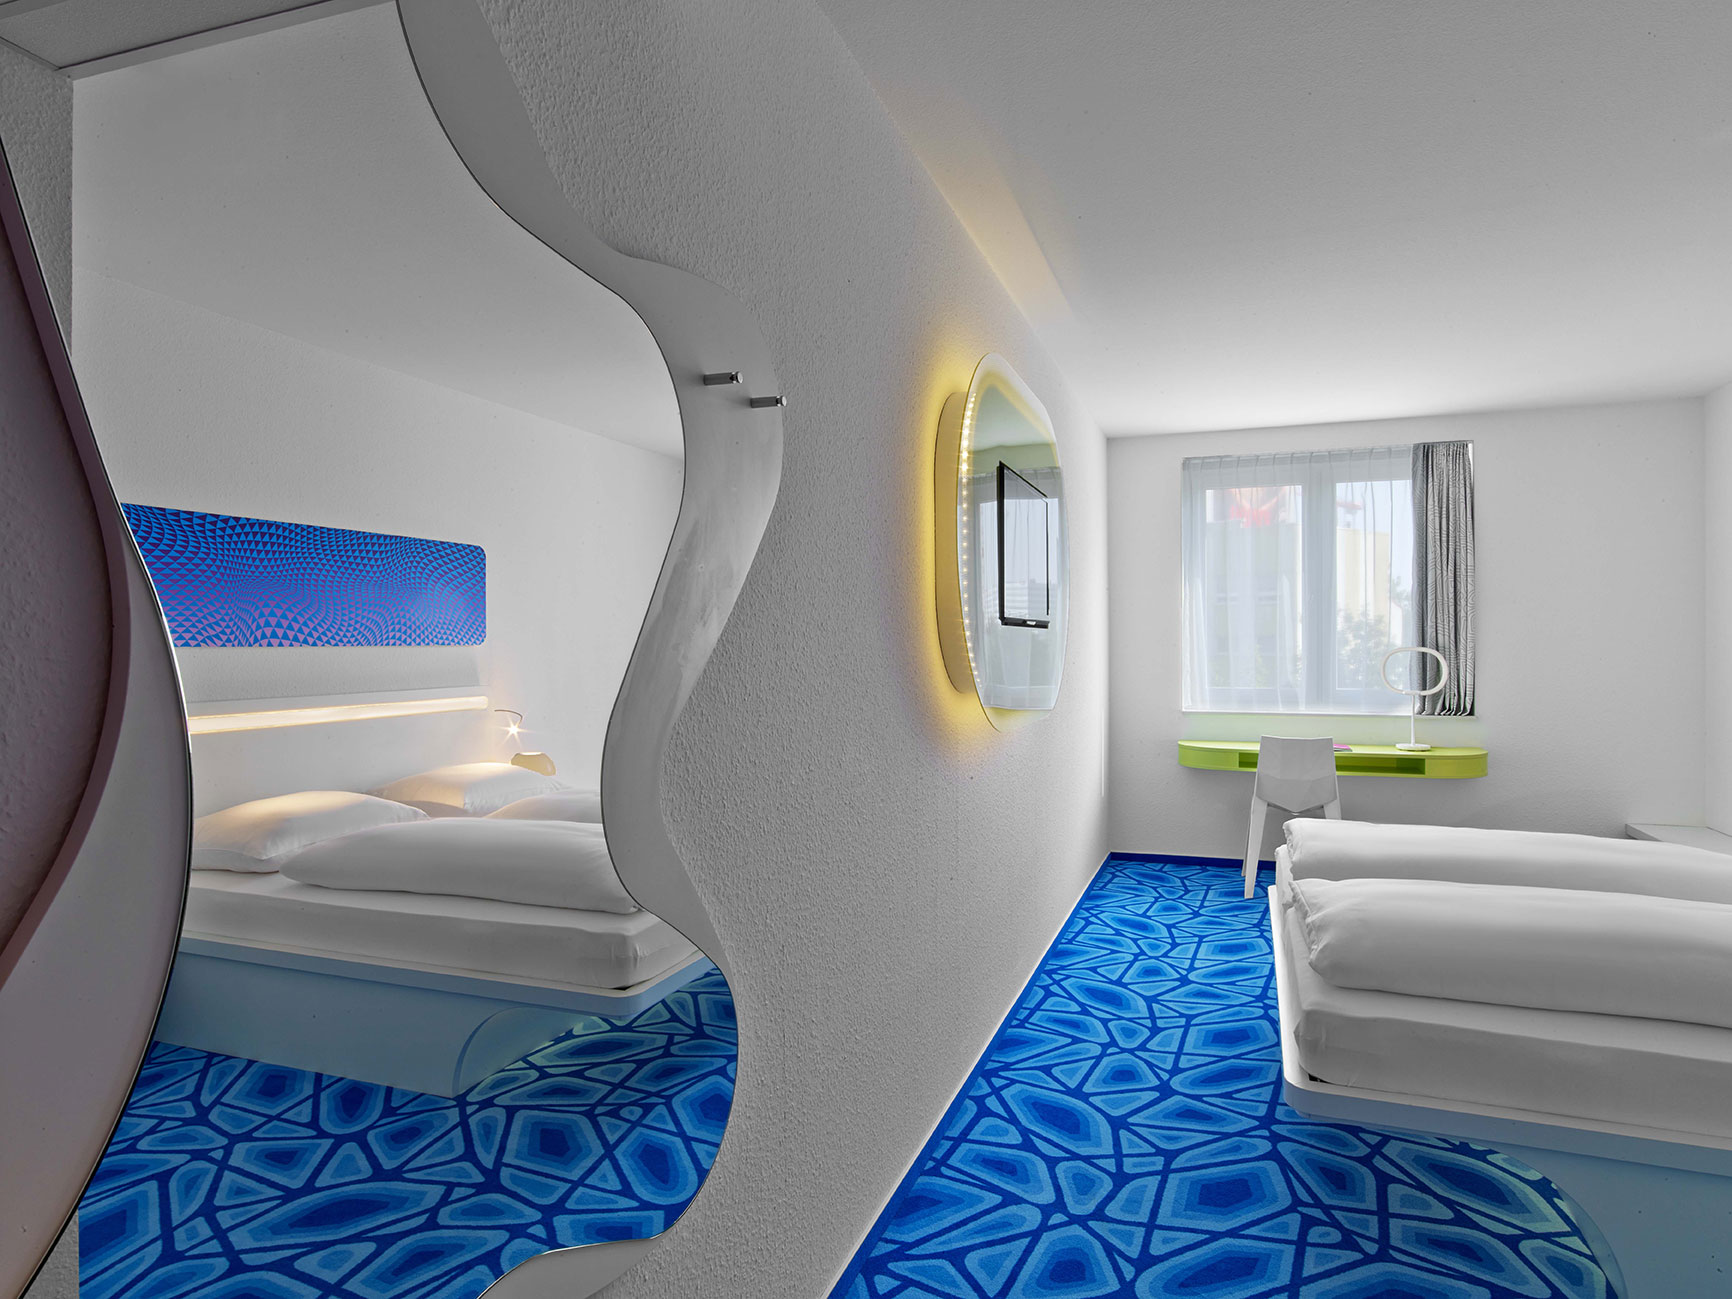 Bright hotel room with a blue floor, white double bed and a built-in TV